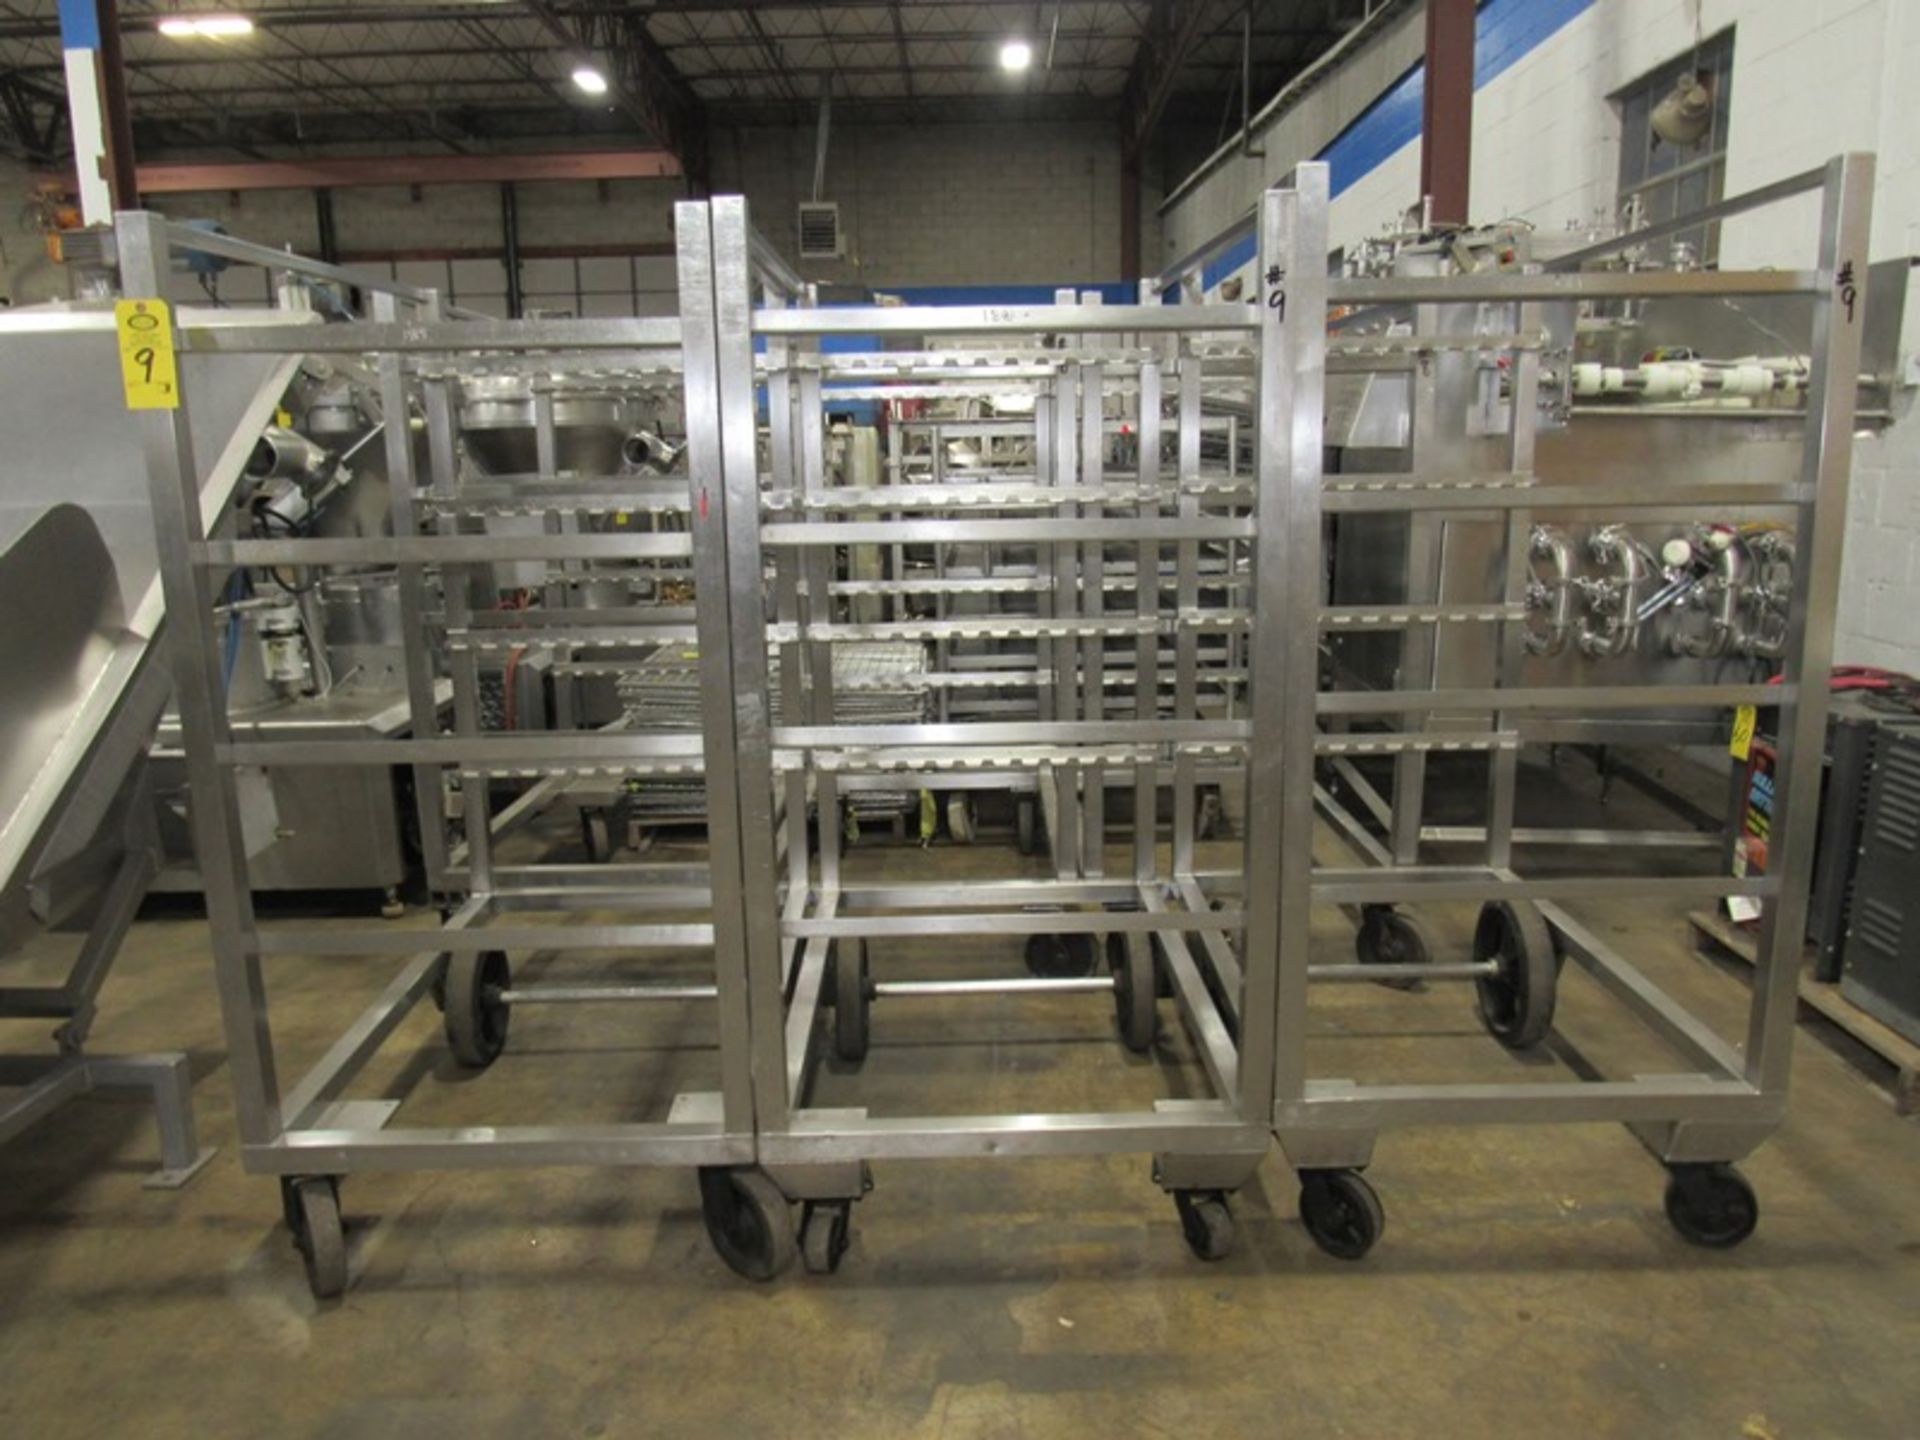 Stainless Steel Smoke Trucks, 34" W X 53 1/2" L X 74" T, 4 spaces to hold 12, 48" sticks spaced